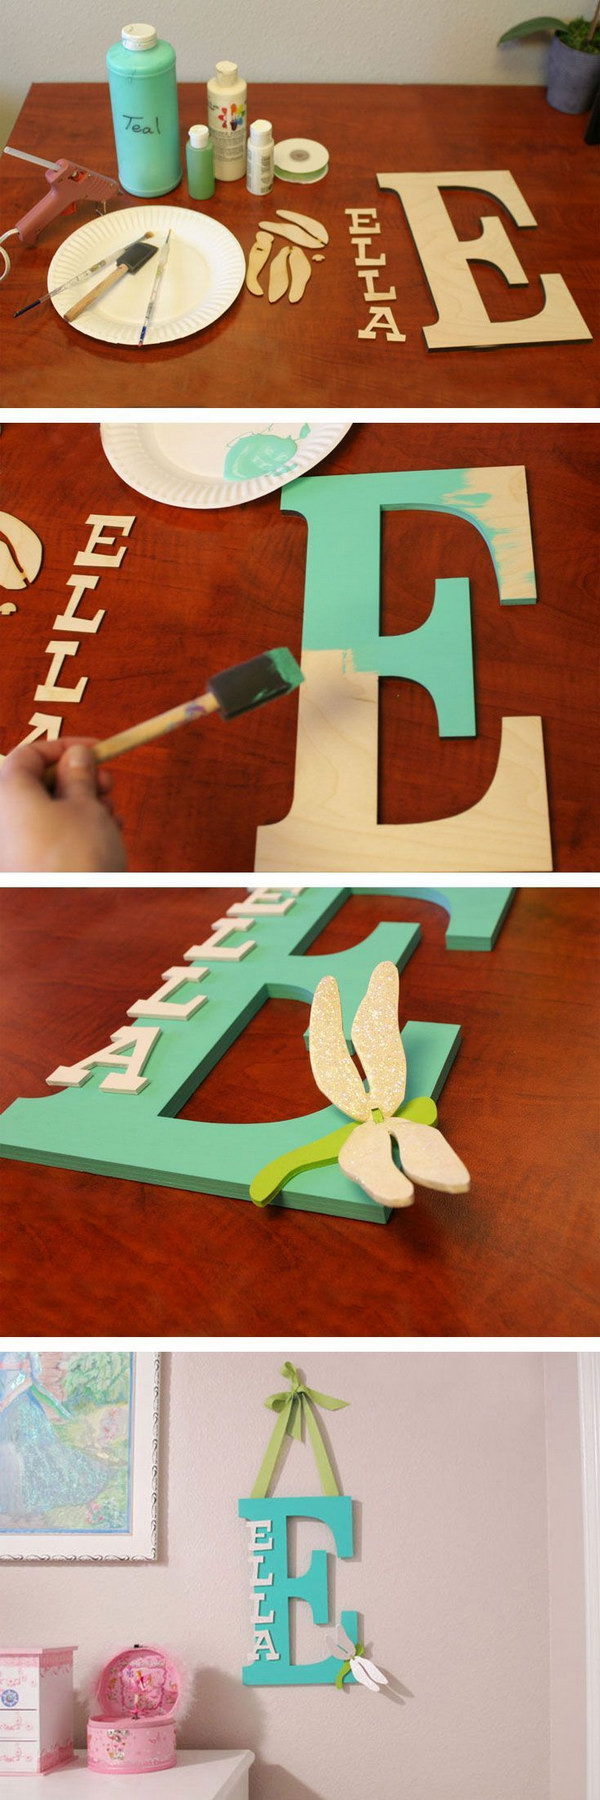 Letters For Kids Room
 45 Awesome DIY Ideas for Making Your Own Decorative Letters